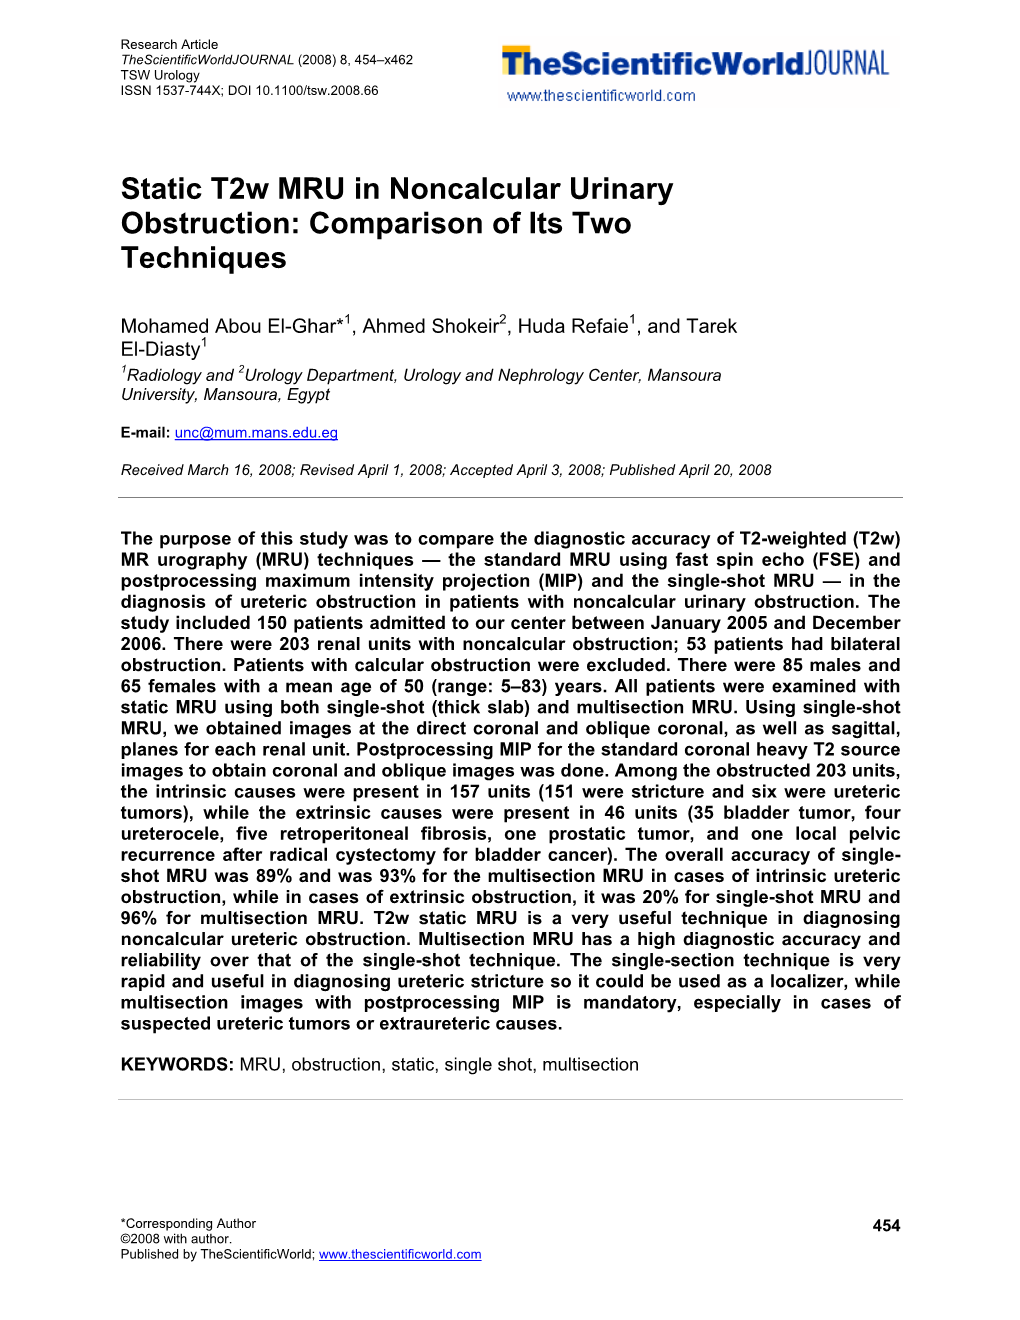 Static T2w MRU in Noncalcular Urinary Obstruction: Comparison of Its Two Techniques